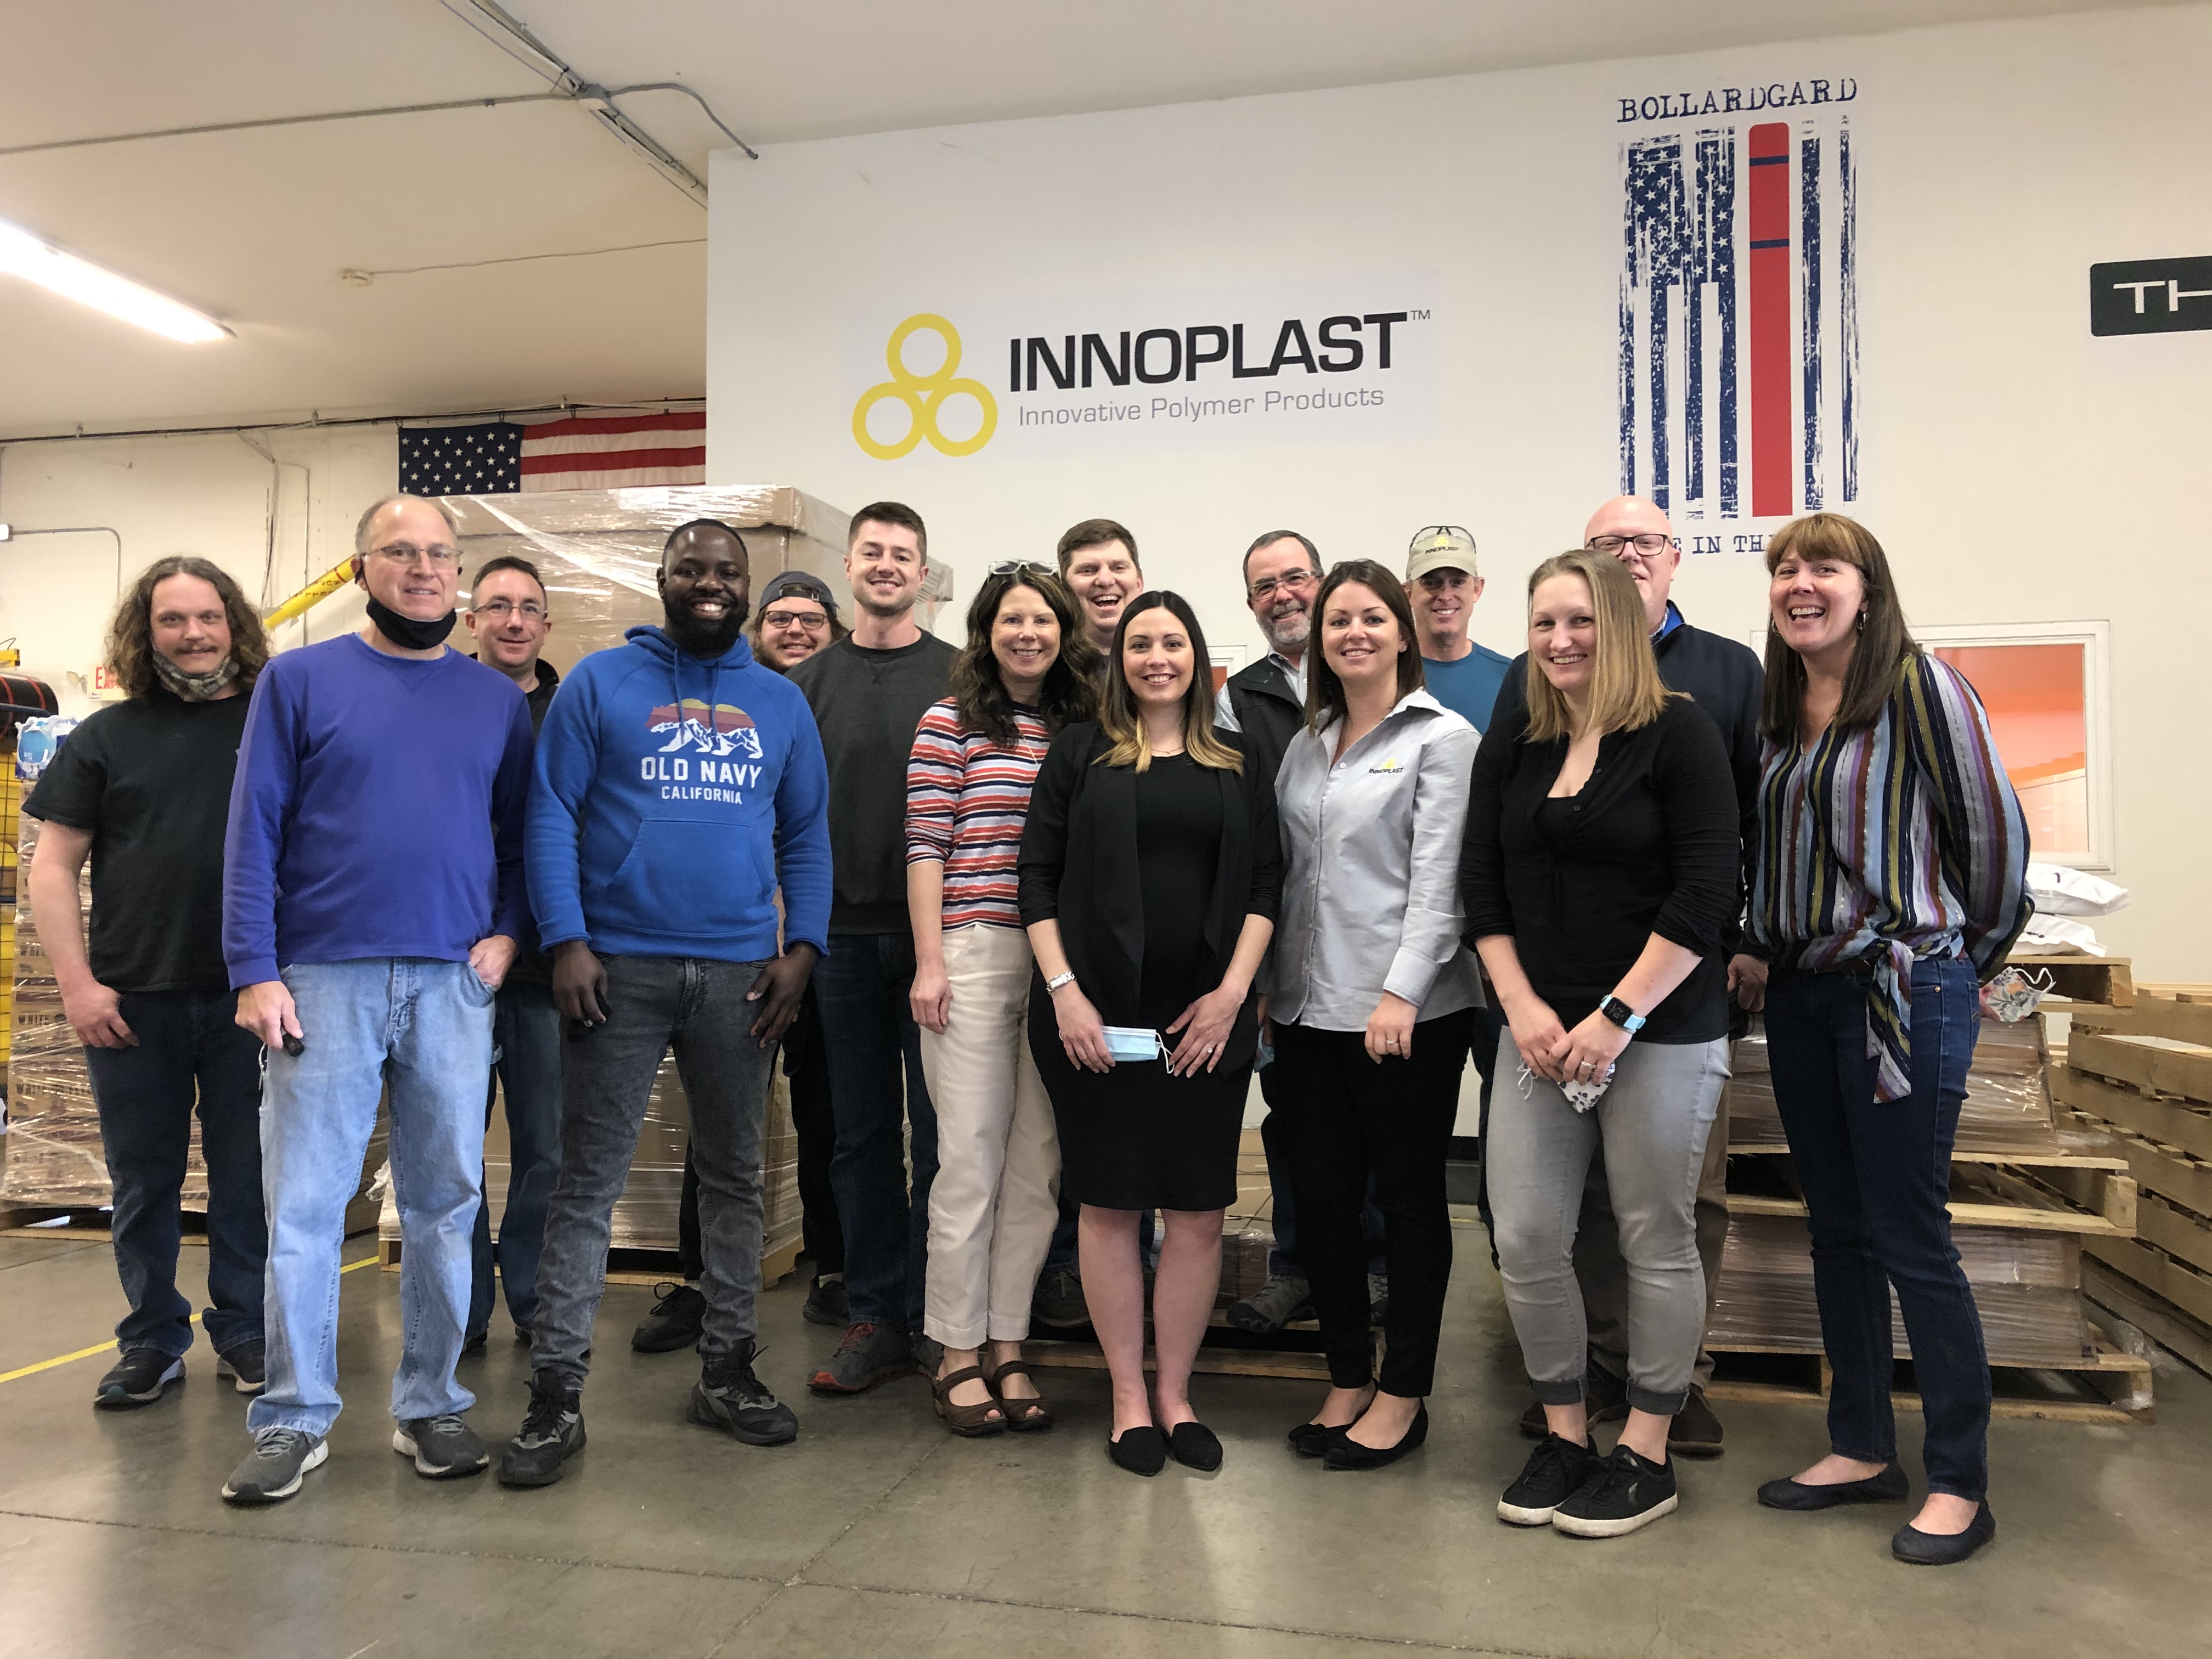 The Innoplast Team in the warehousing posing in front of the company logo